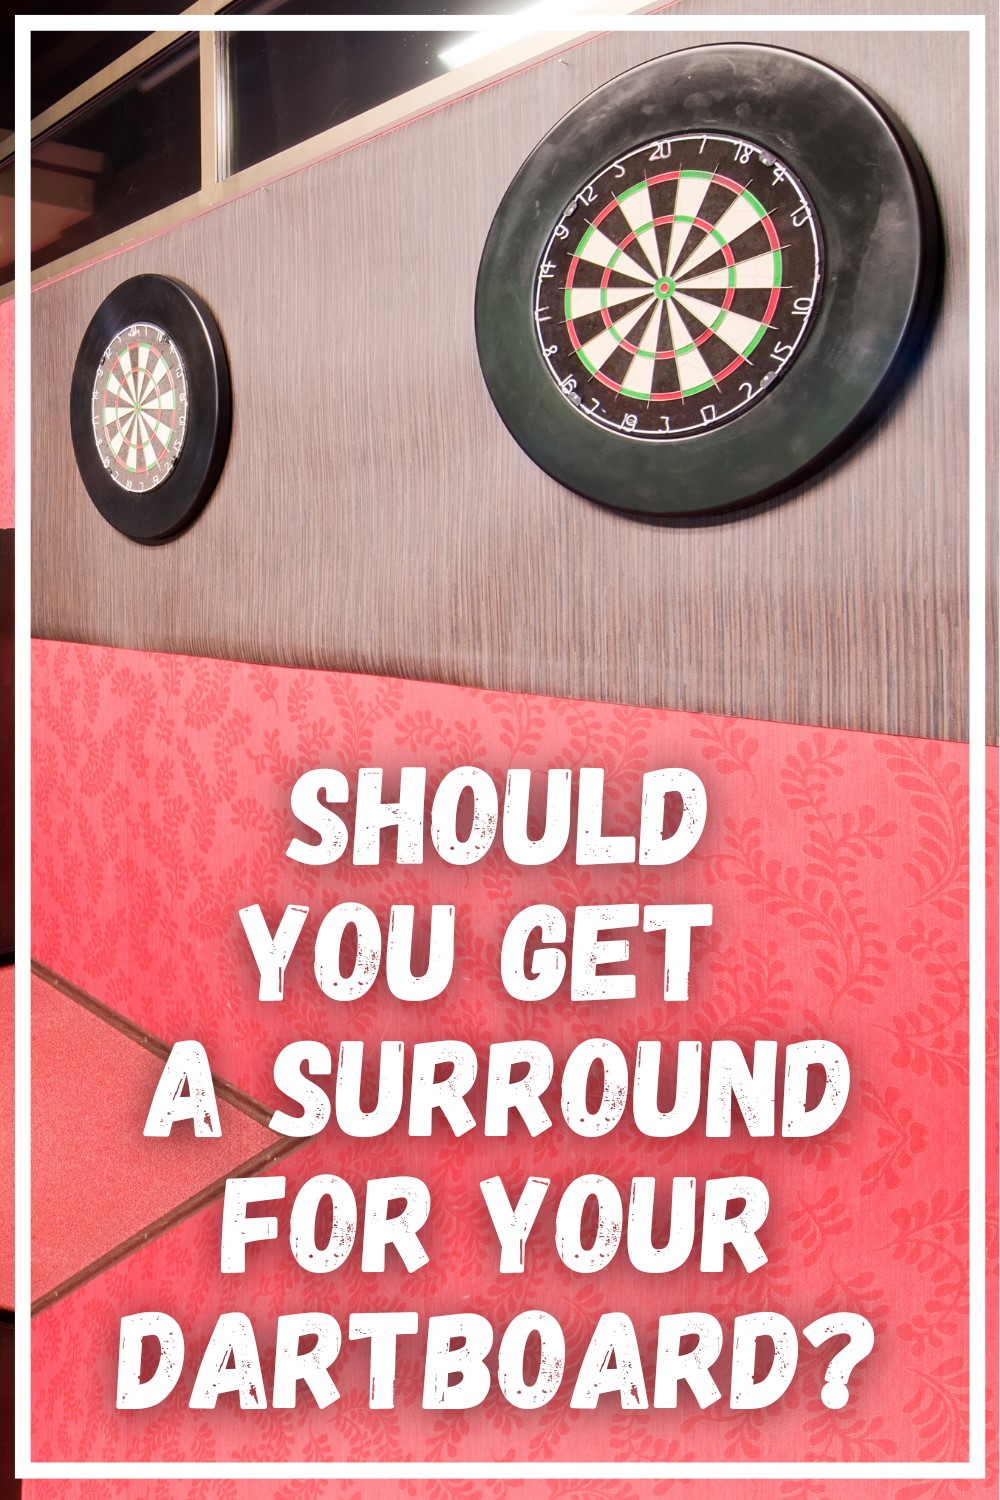 5 Best Dartboard Surrounds To Protect Your Walls (and Darts